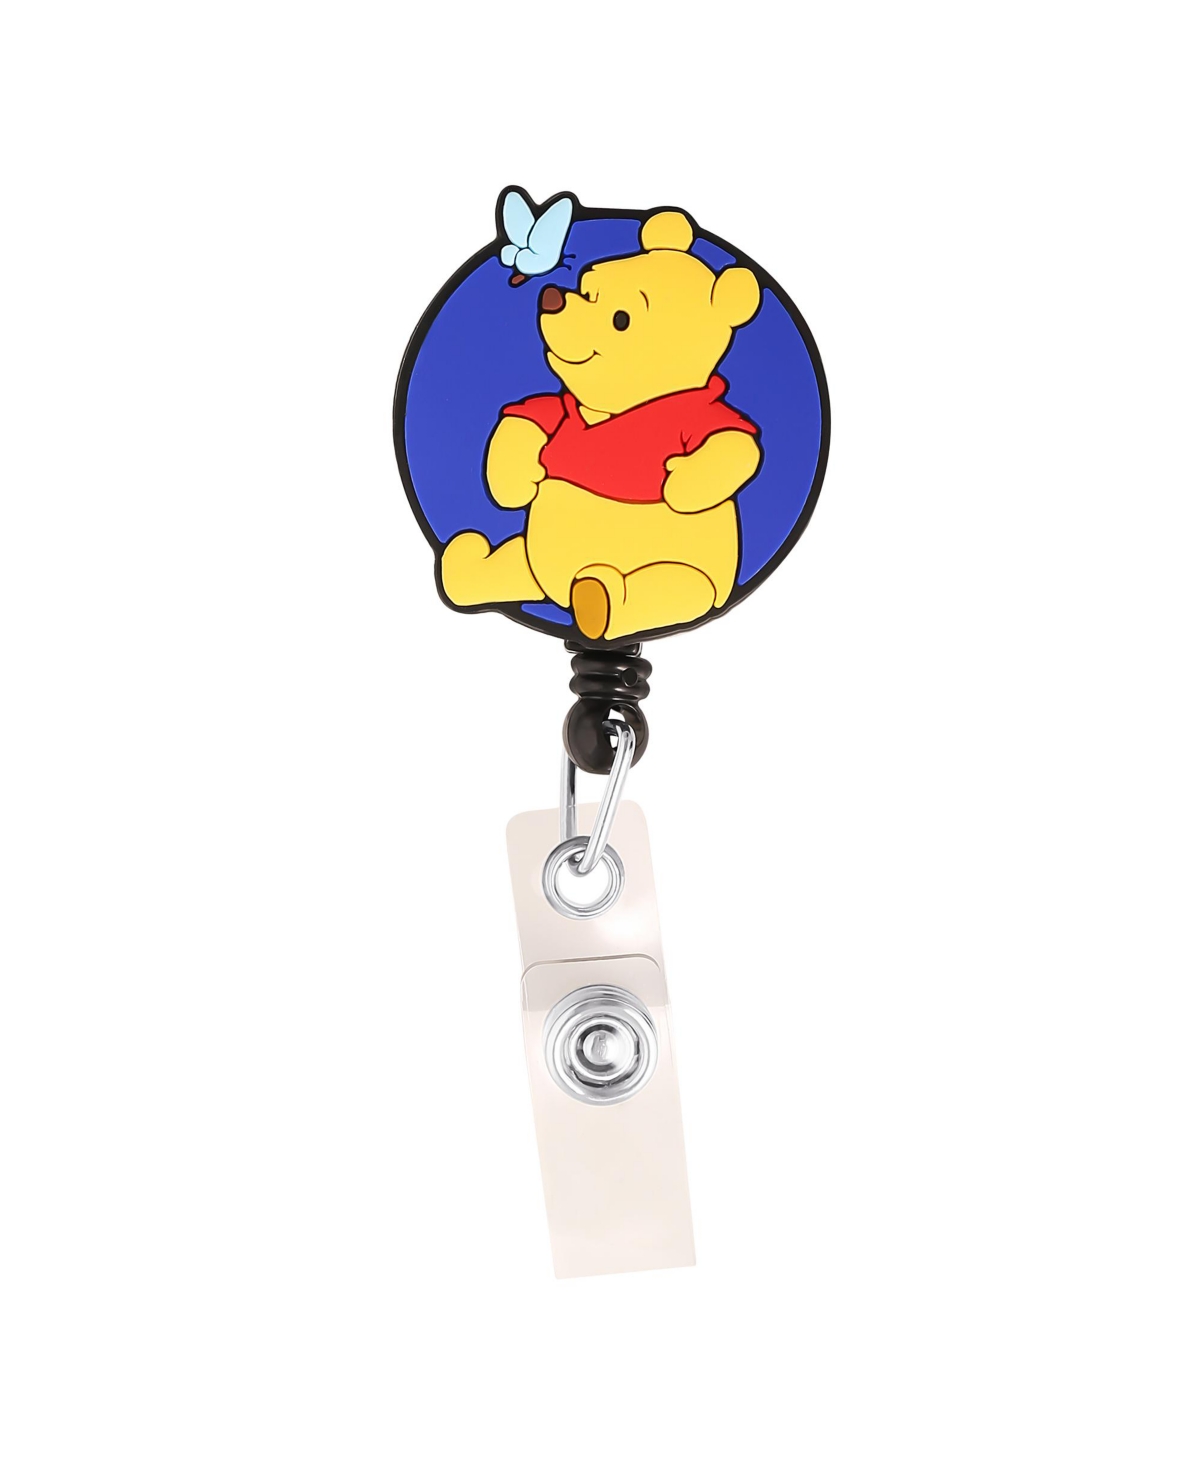 Winnie The Pooh Badge Reels Retractable for Nursing, School, Office - Pooh Badge Holder with Alligator Clip Badge Reel - Blue, yellow, red